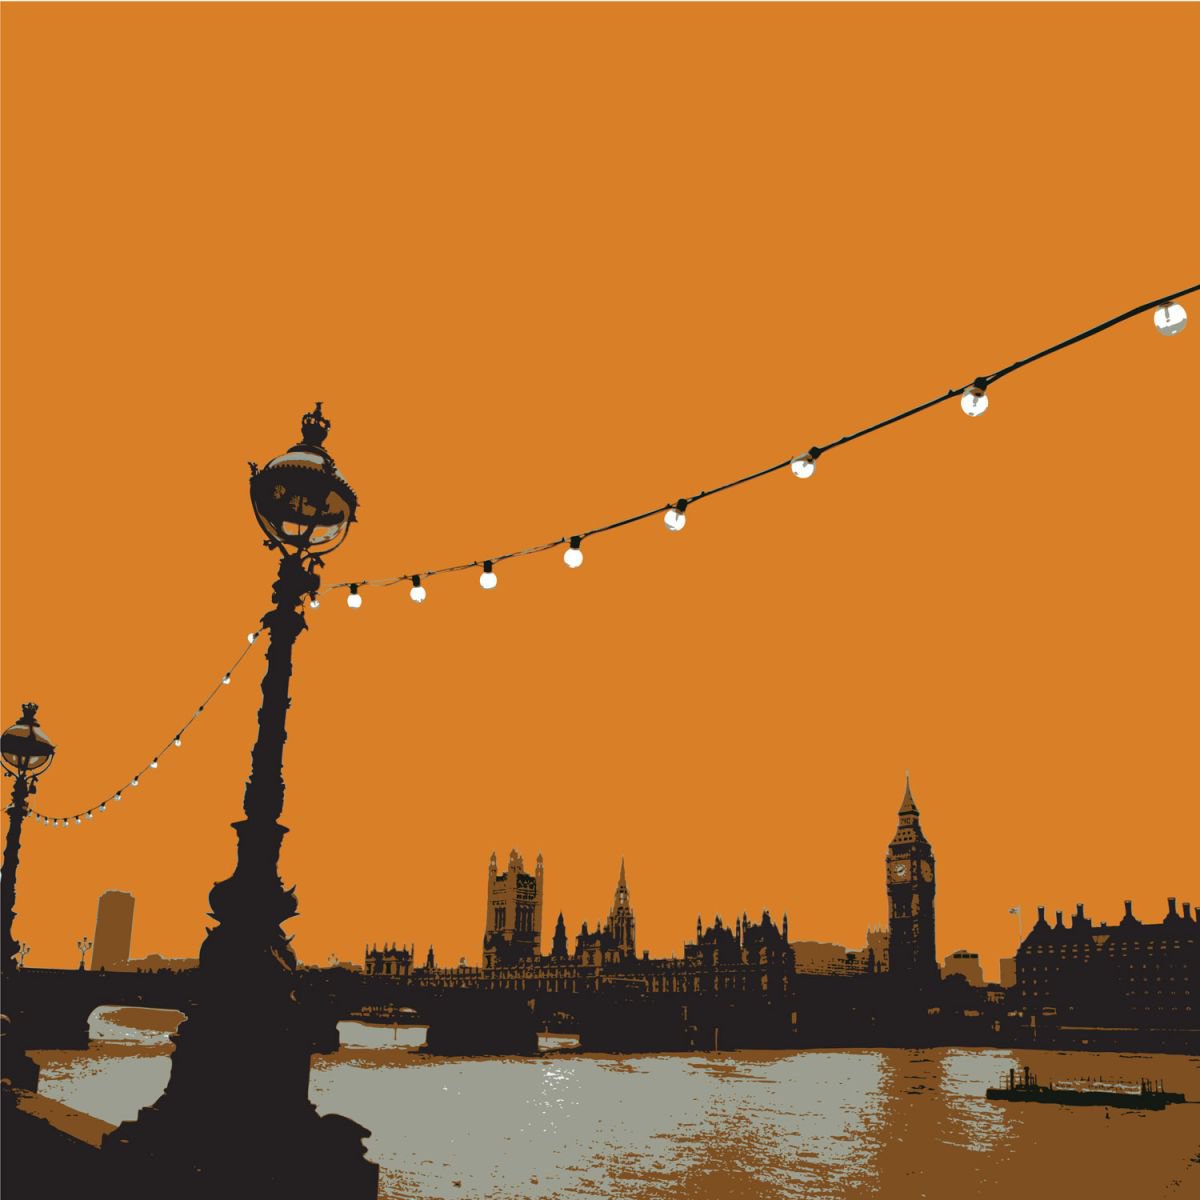 LONDON ON THE THAMES #1 by Keith Dodd